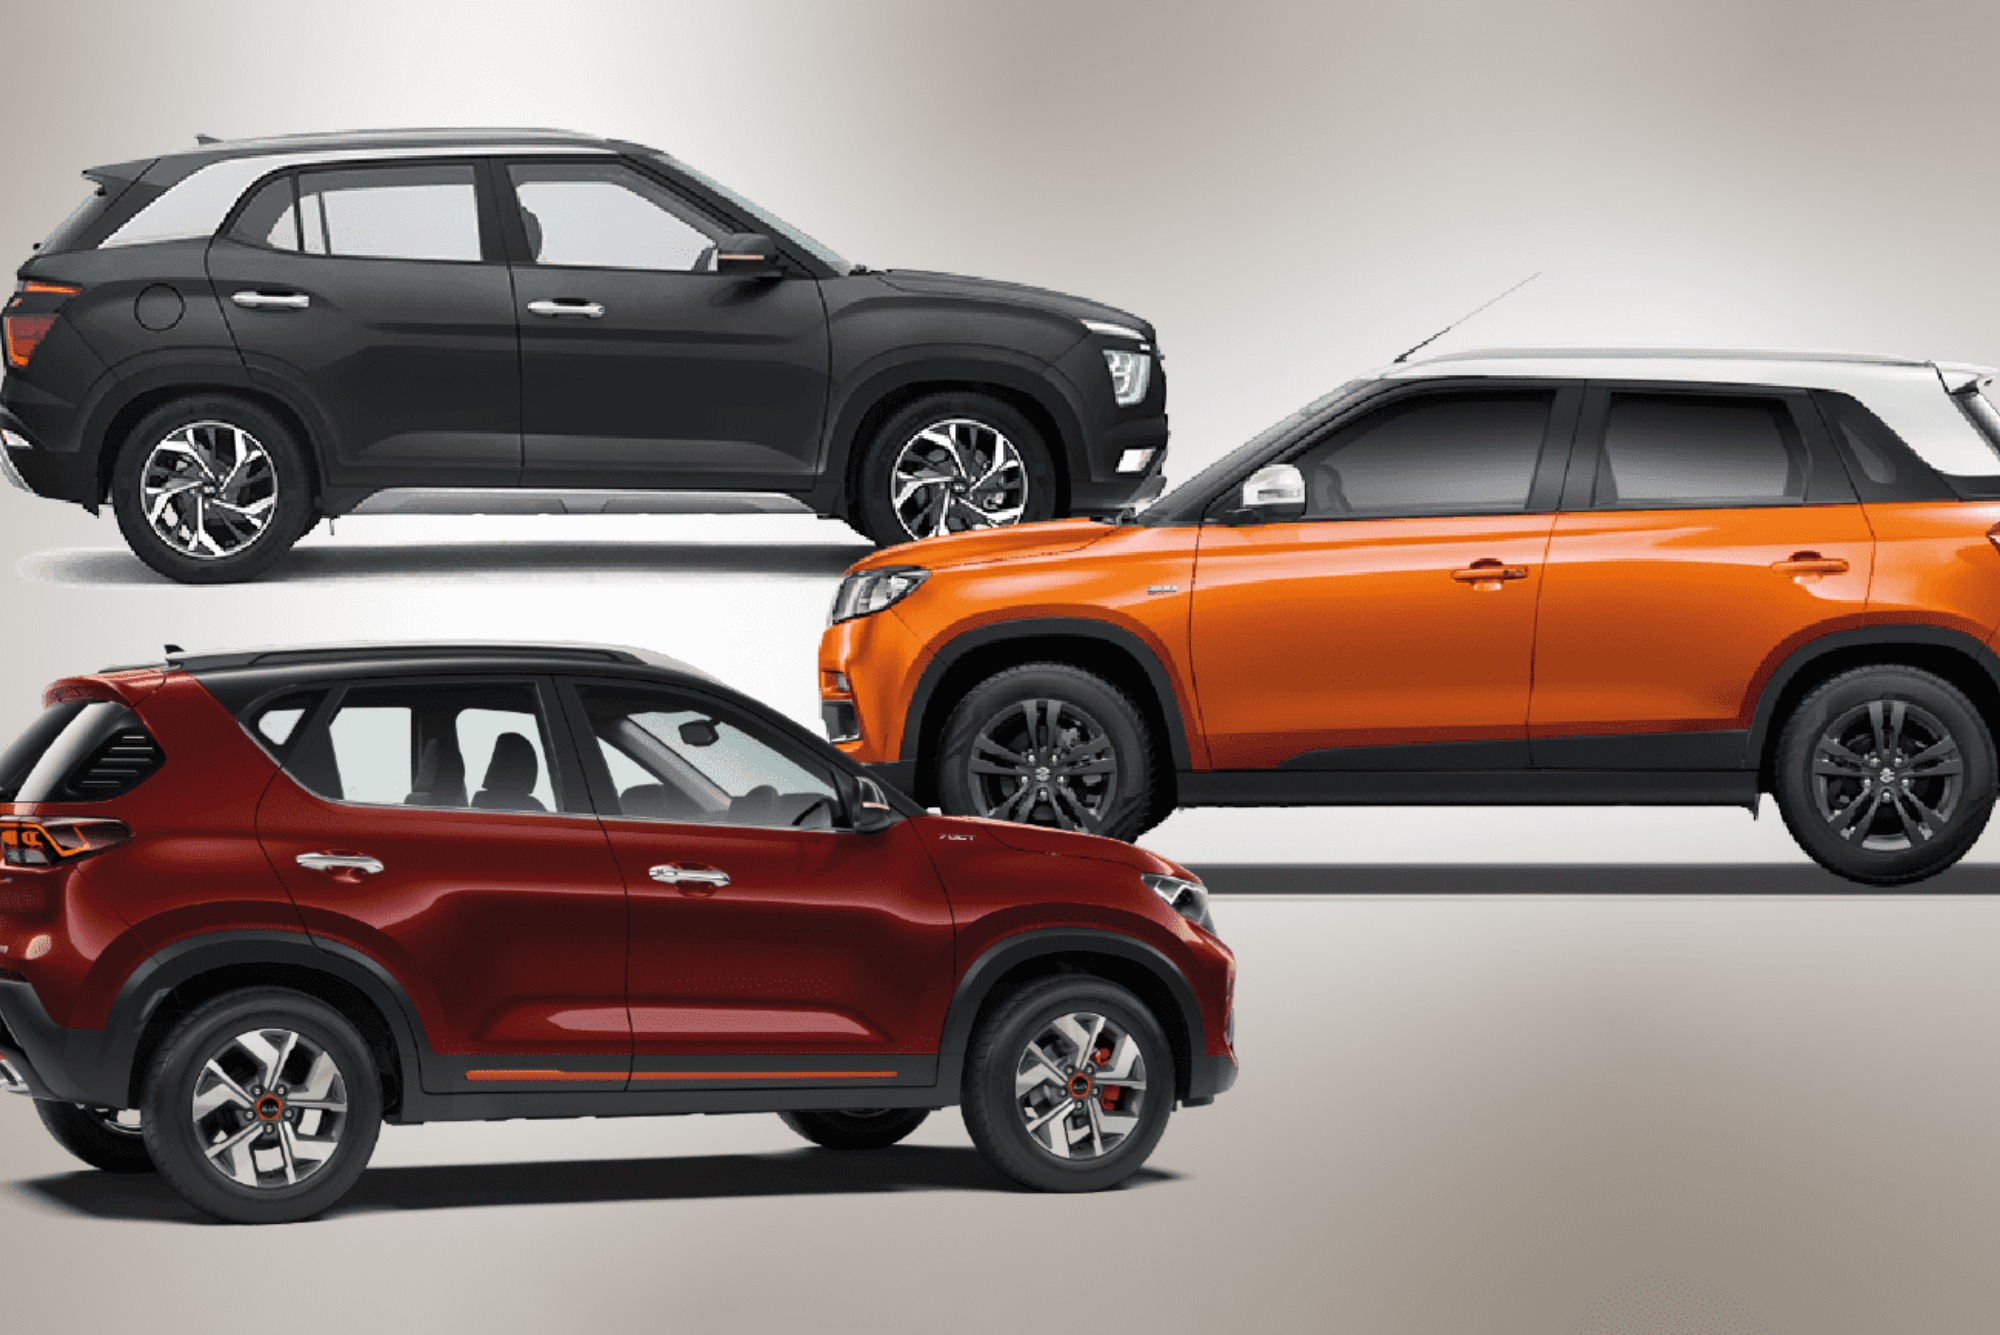 Which SUV Car is Best in India